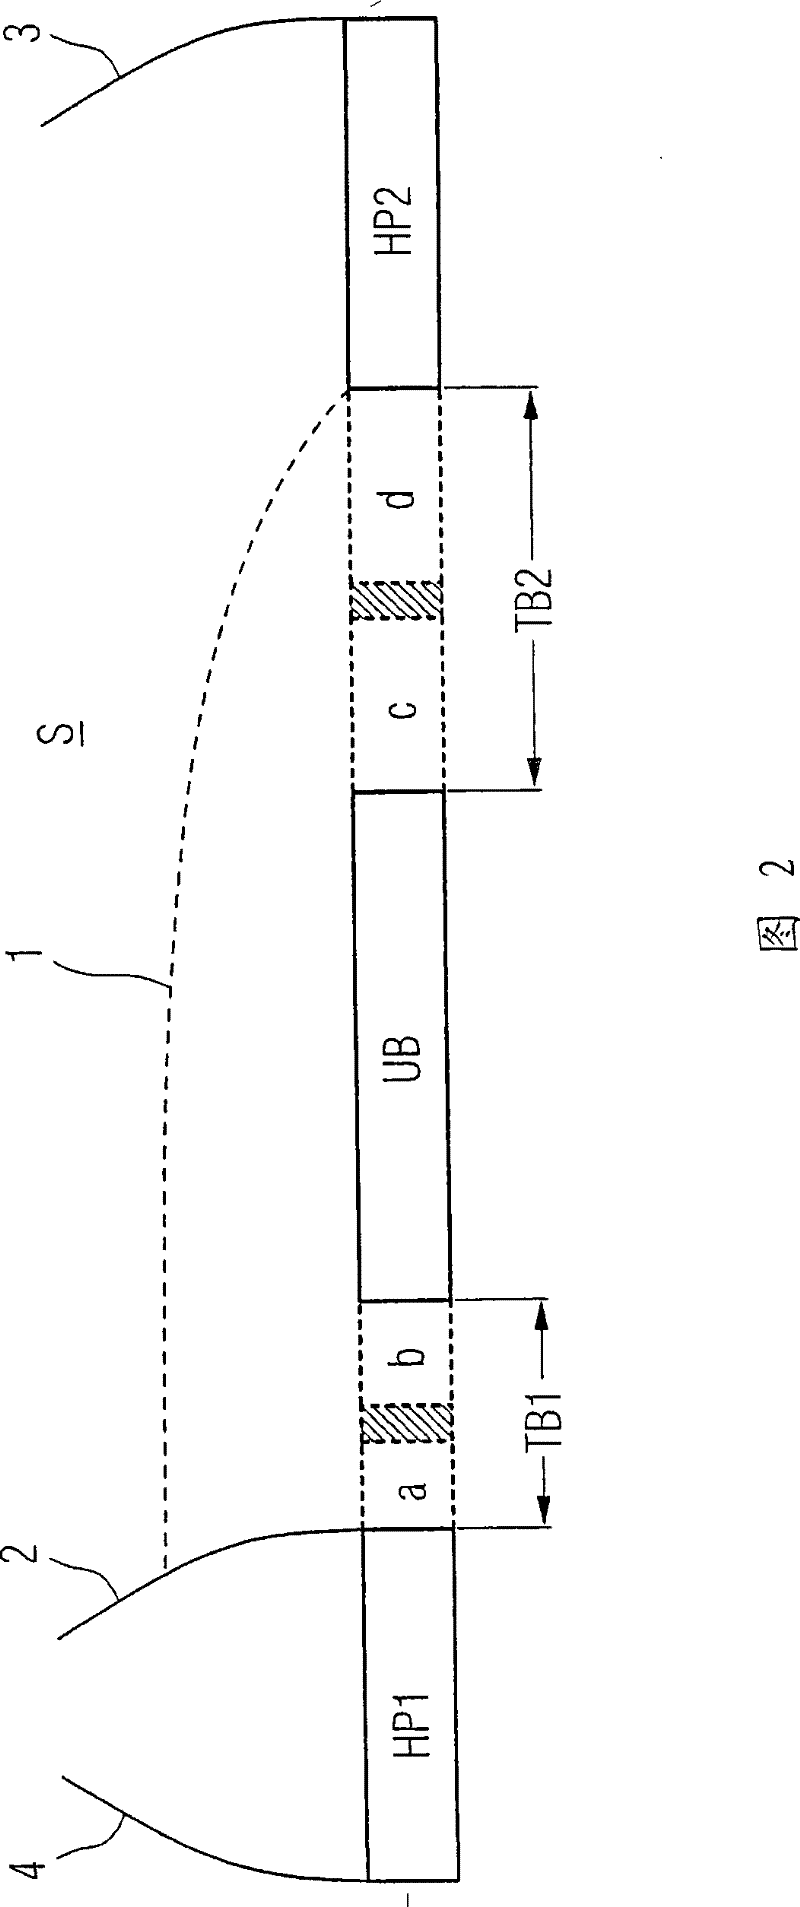 Method and equipment for automatically controlling track vehicle and lines used for track vehicles